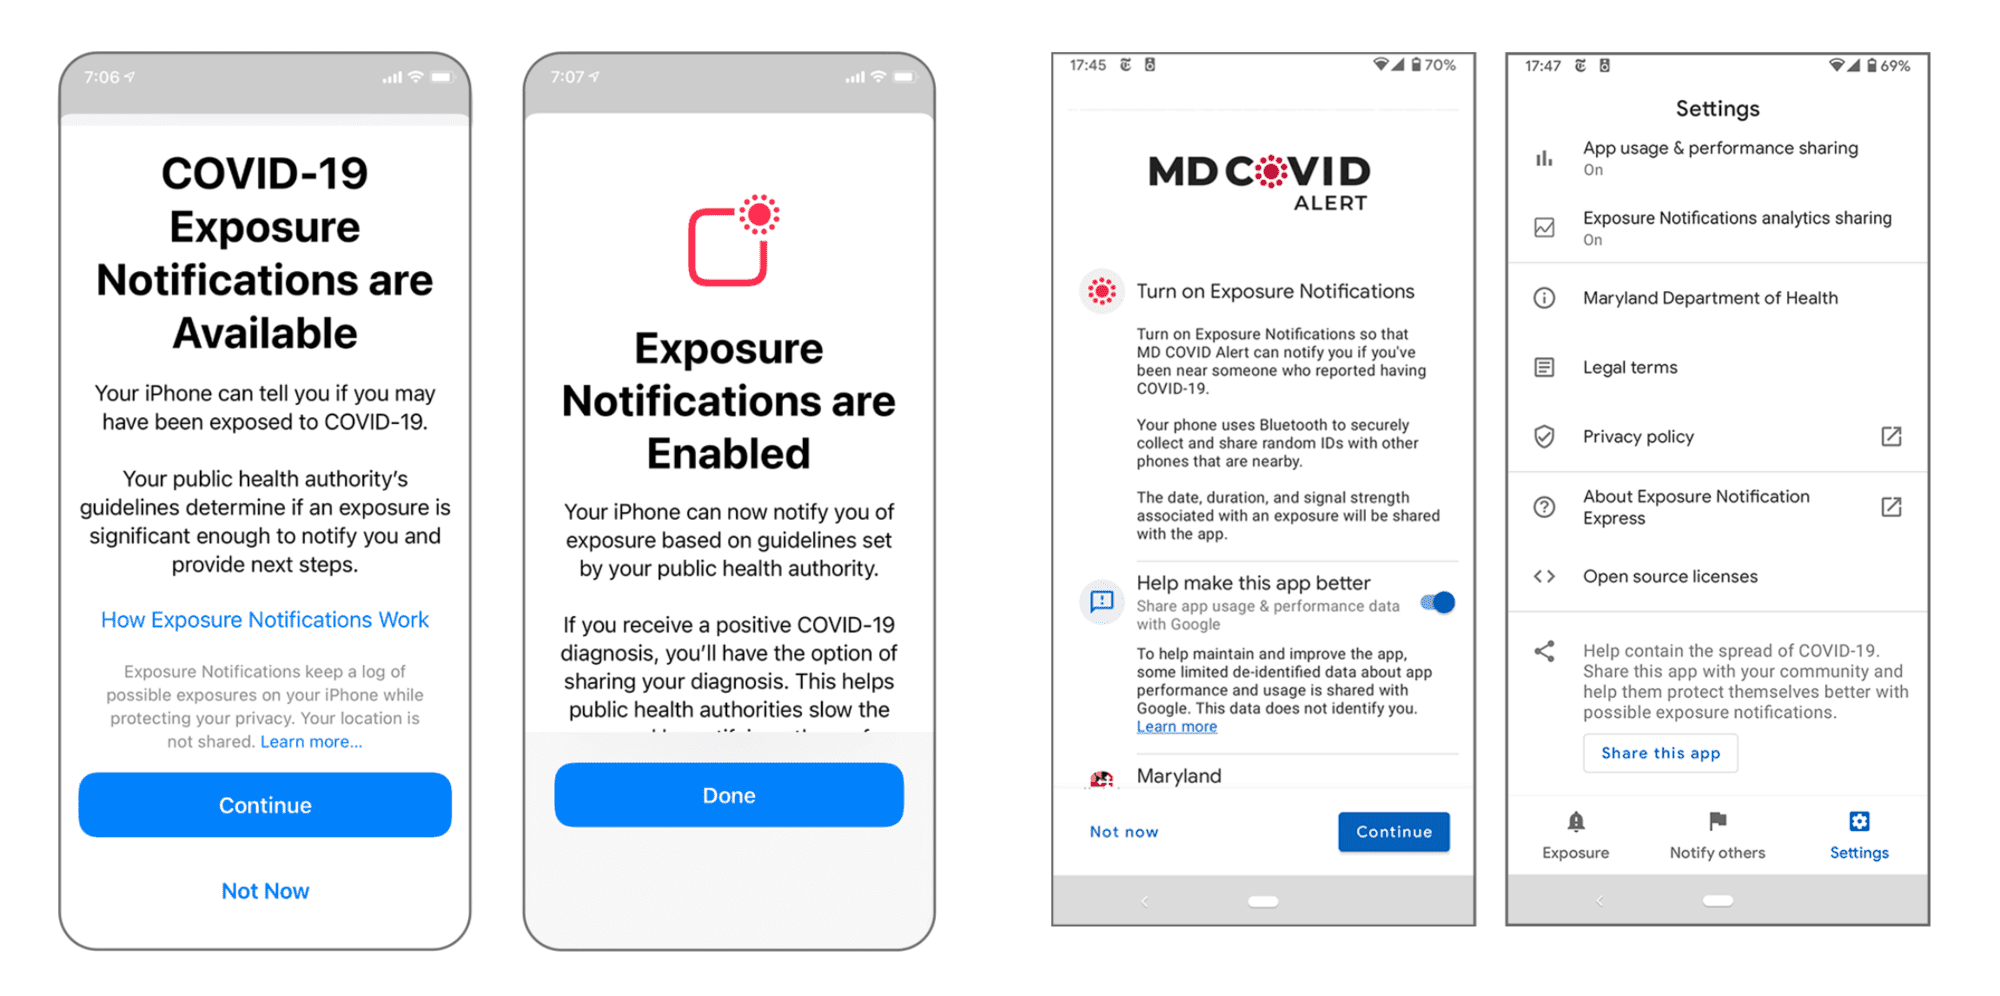 Marylanders Can Use MD COVID Alert to Receive Confidential COVID-19 Exposure Notifications on Smartphones